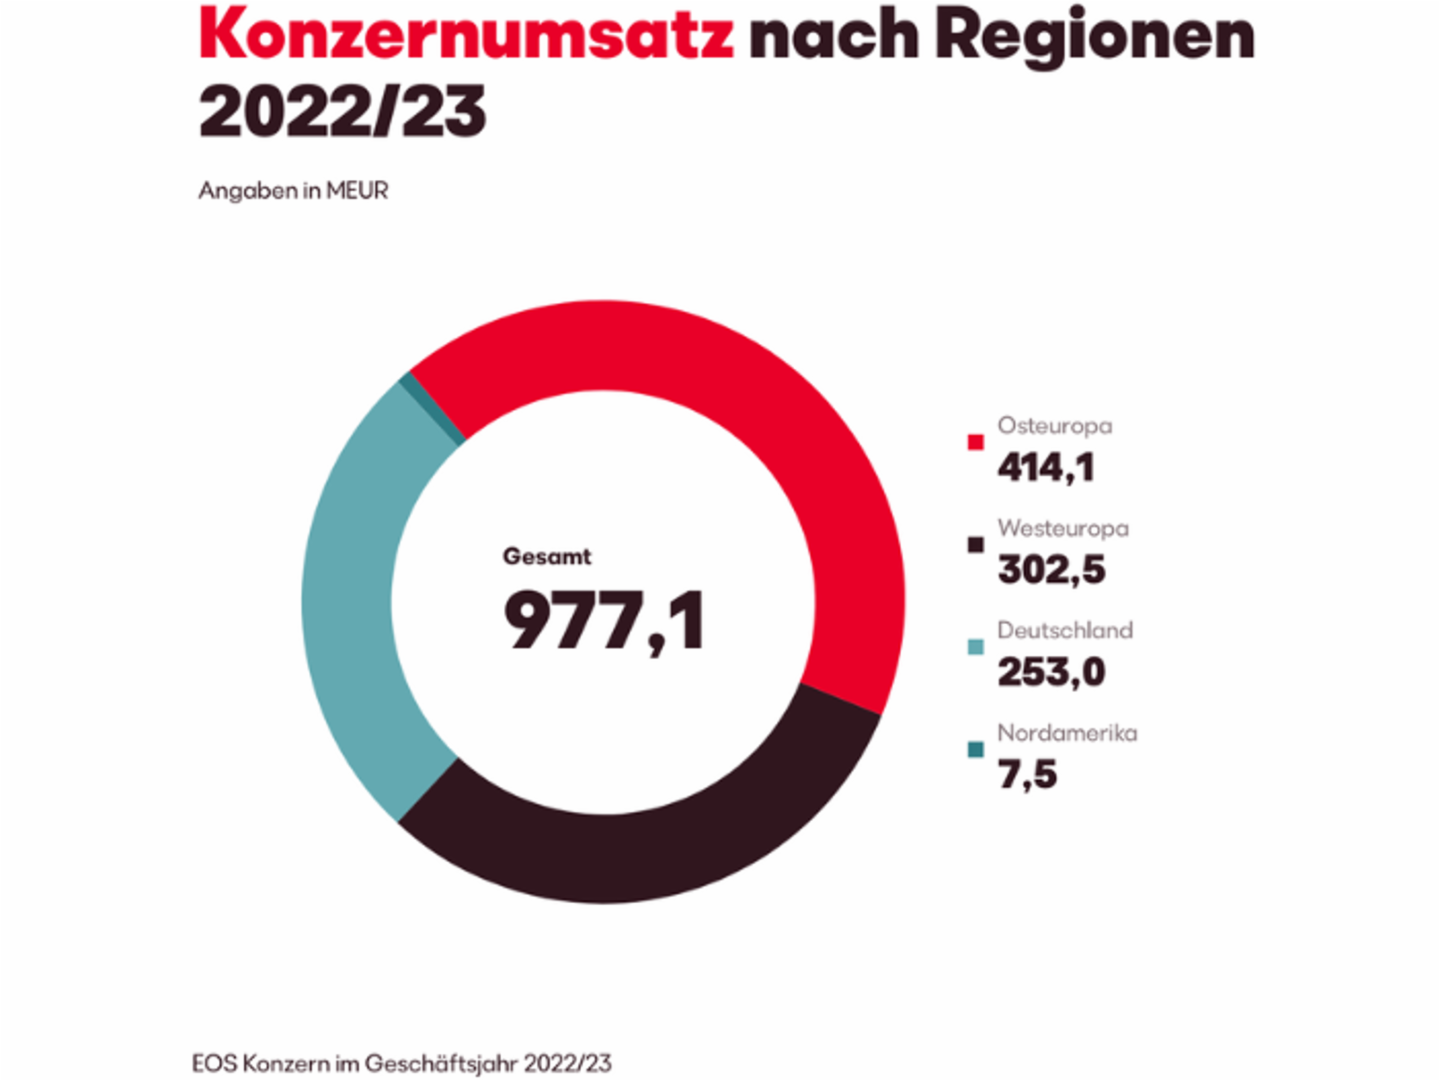 EOS consolidated revenue by region 2022-23